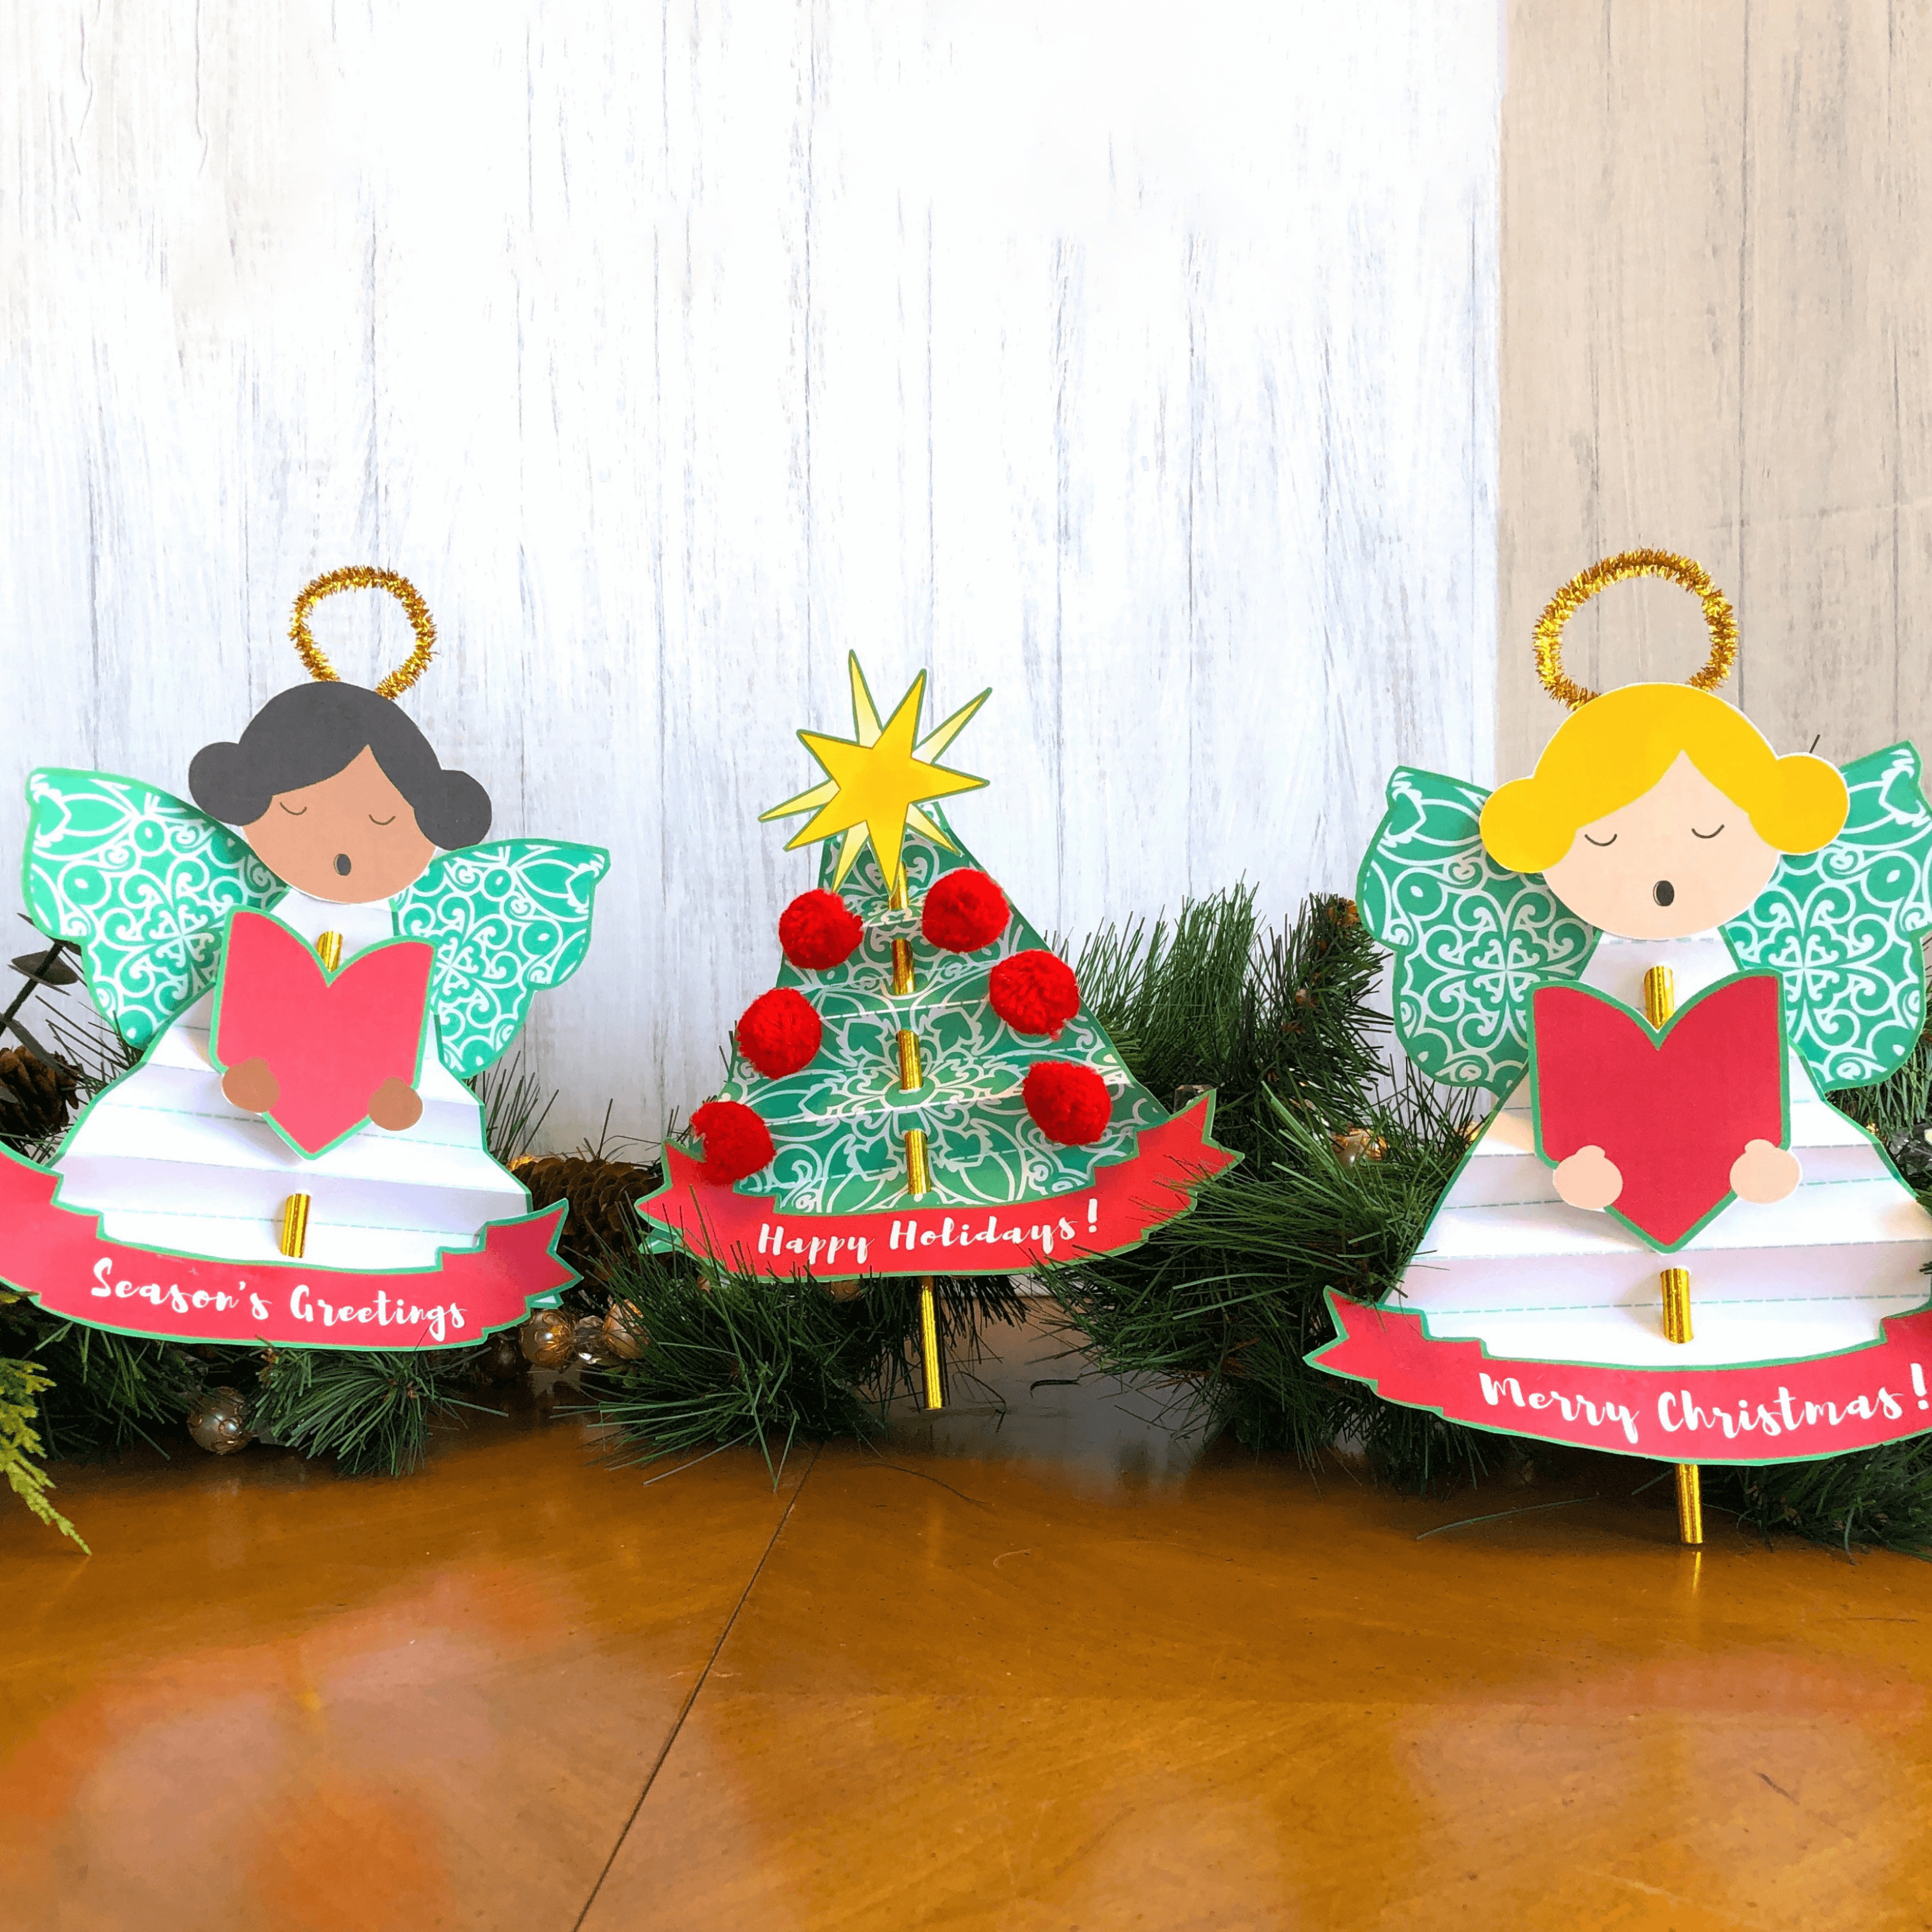 Two adorable singing angels and a Christmas tree made from folded paper and gold straws are lined up against a green pine garland. Banners at the bottom of the decorations read “Happy Holidays,” “Season’s Greetings,” and “Merry Christmas.”